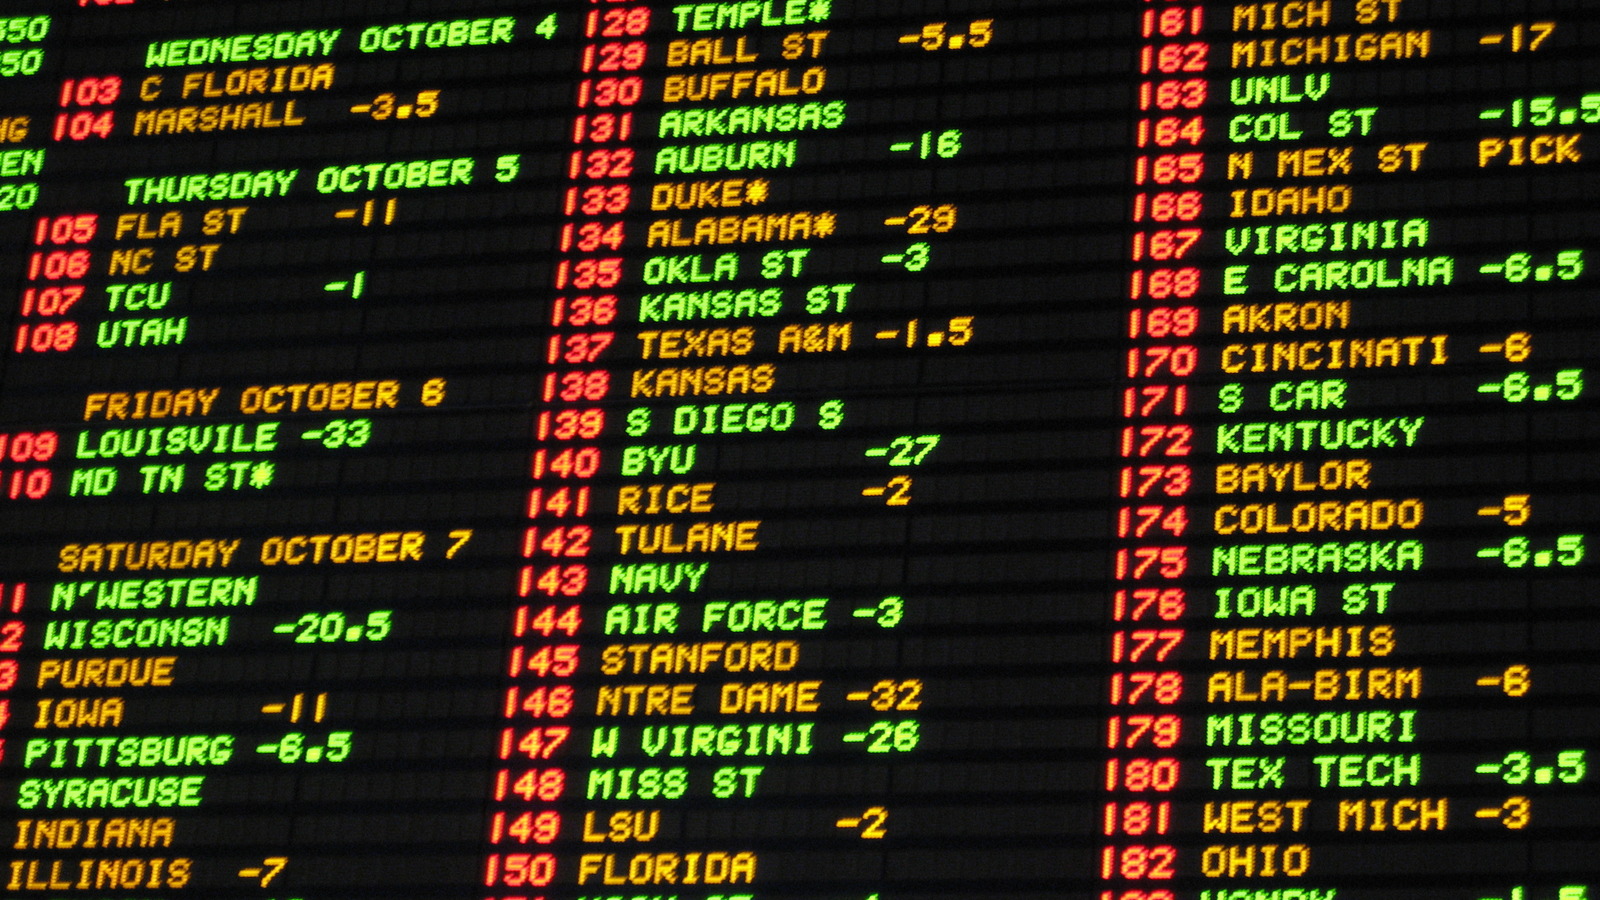 Wyoming plans to expand sports betting despite low initial numbers